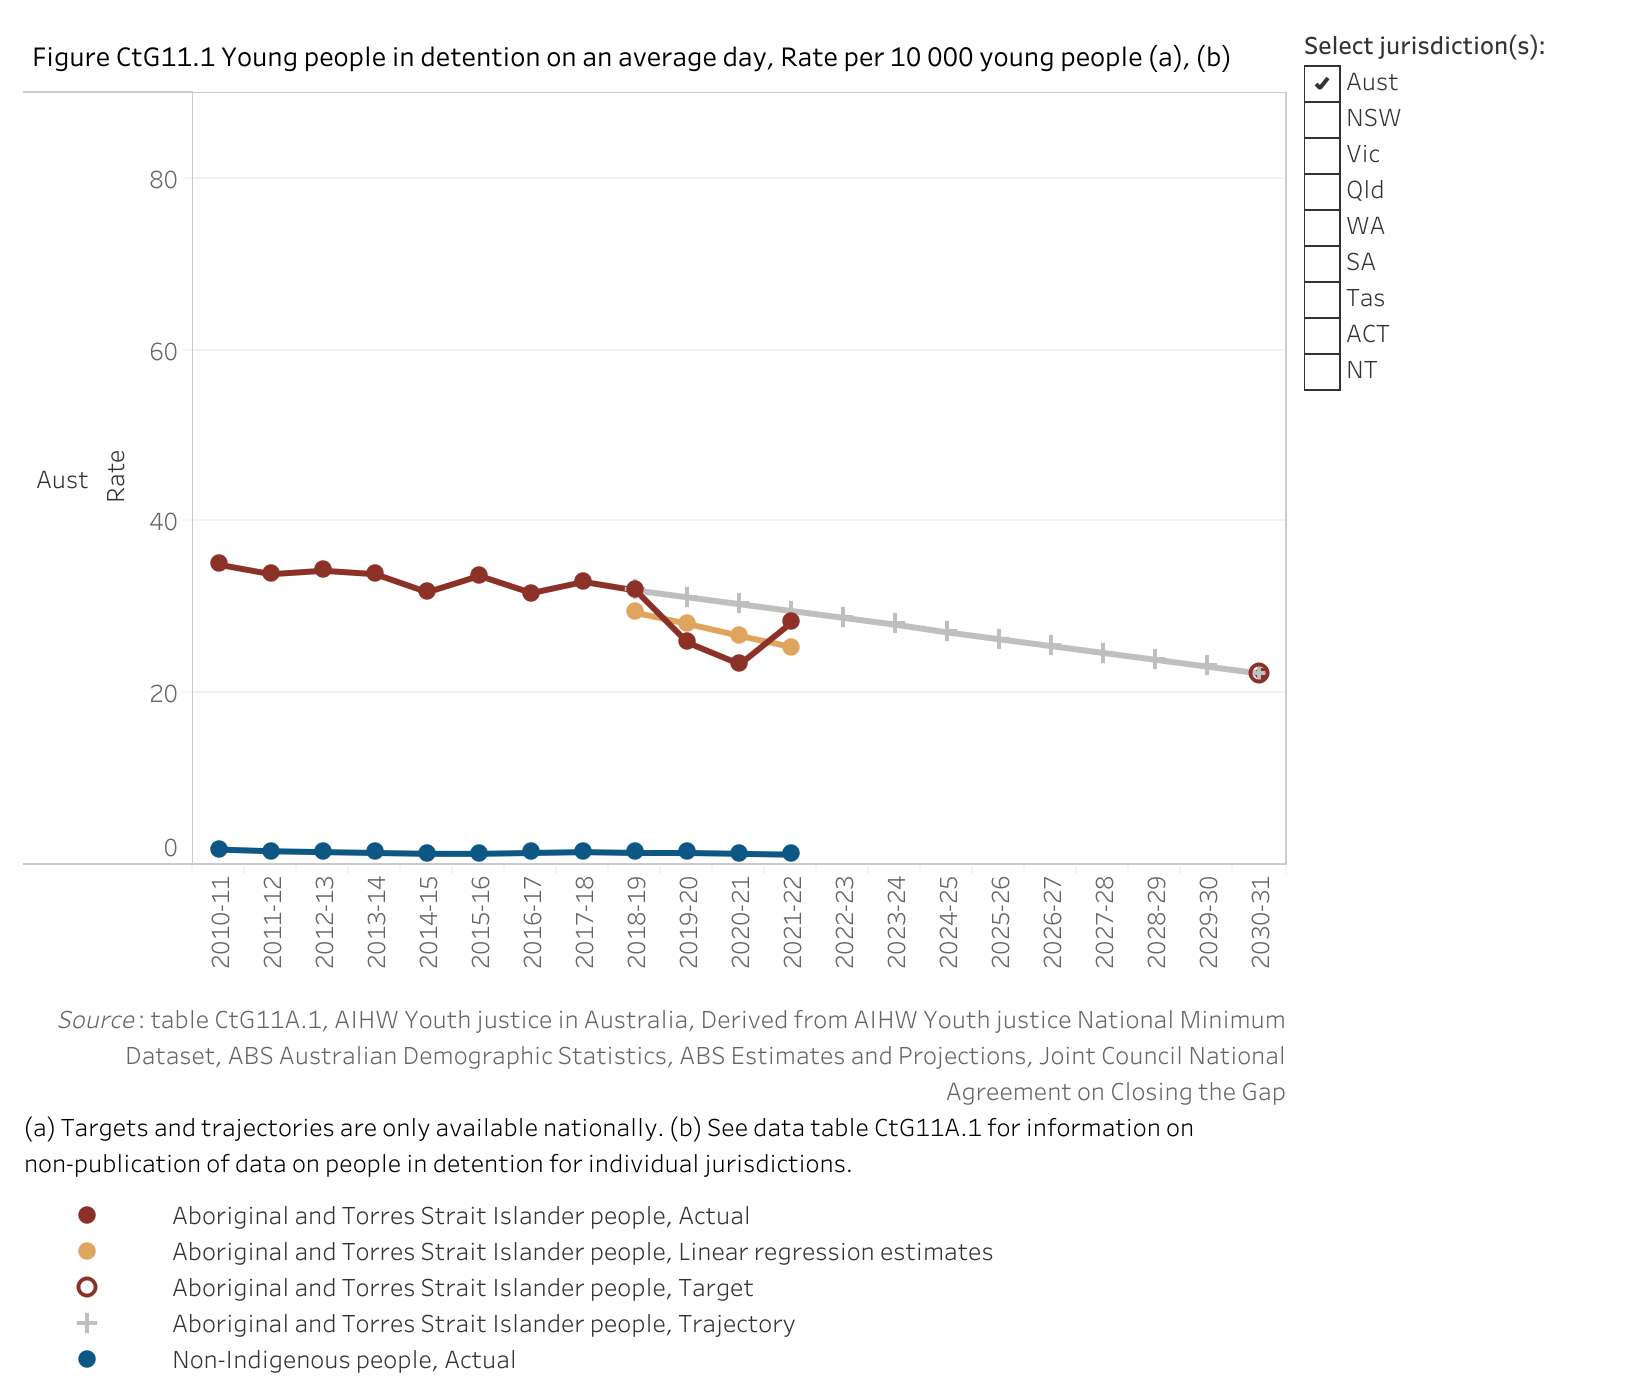 Figure CtG11.1 shows young people in detention on an average day, Rate per 10 000 young people. More details can be found within the text near this image.